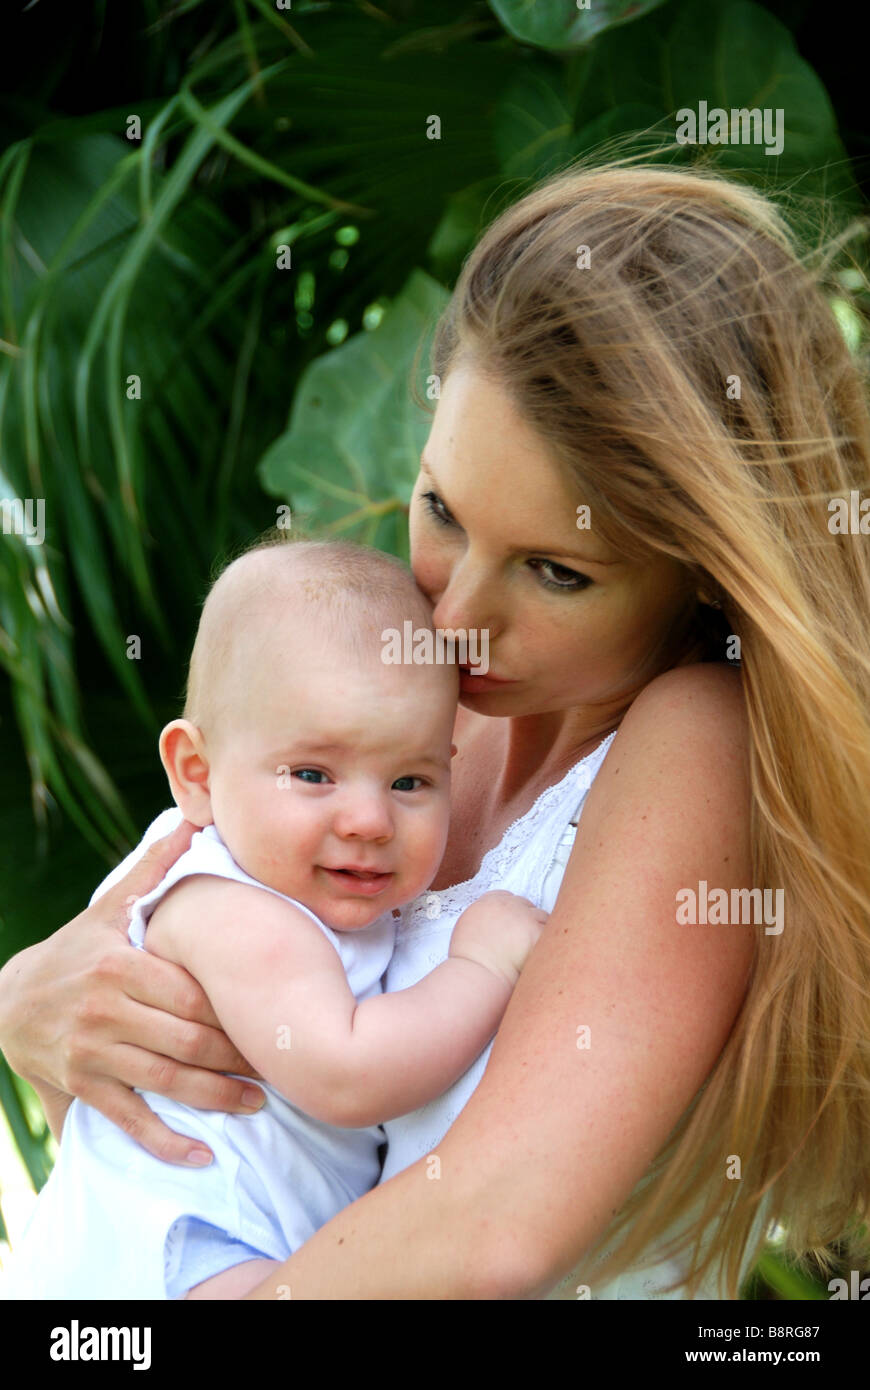 Young mother kissing and holding baby Stock Photo